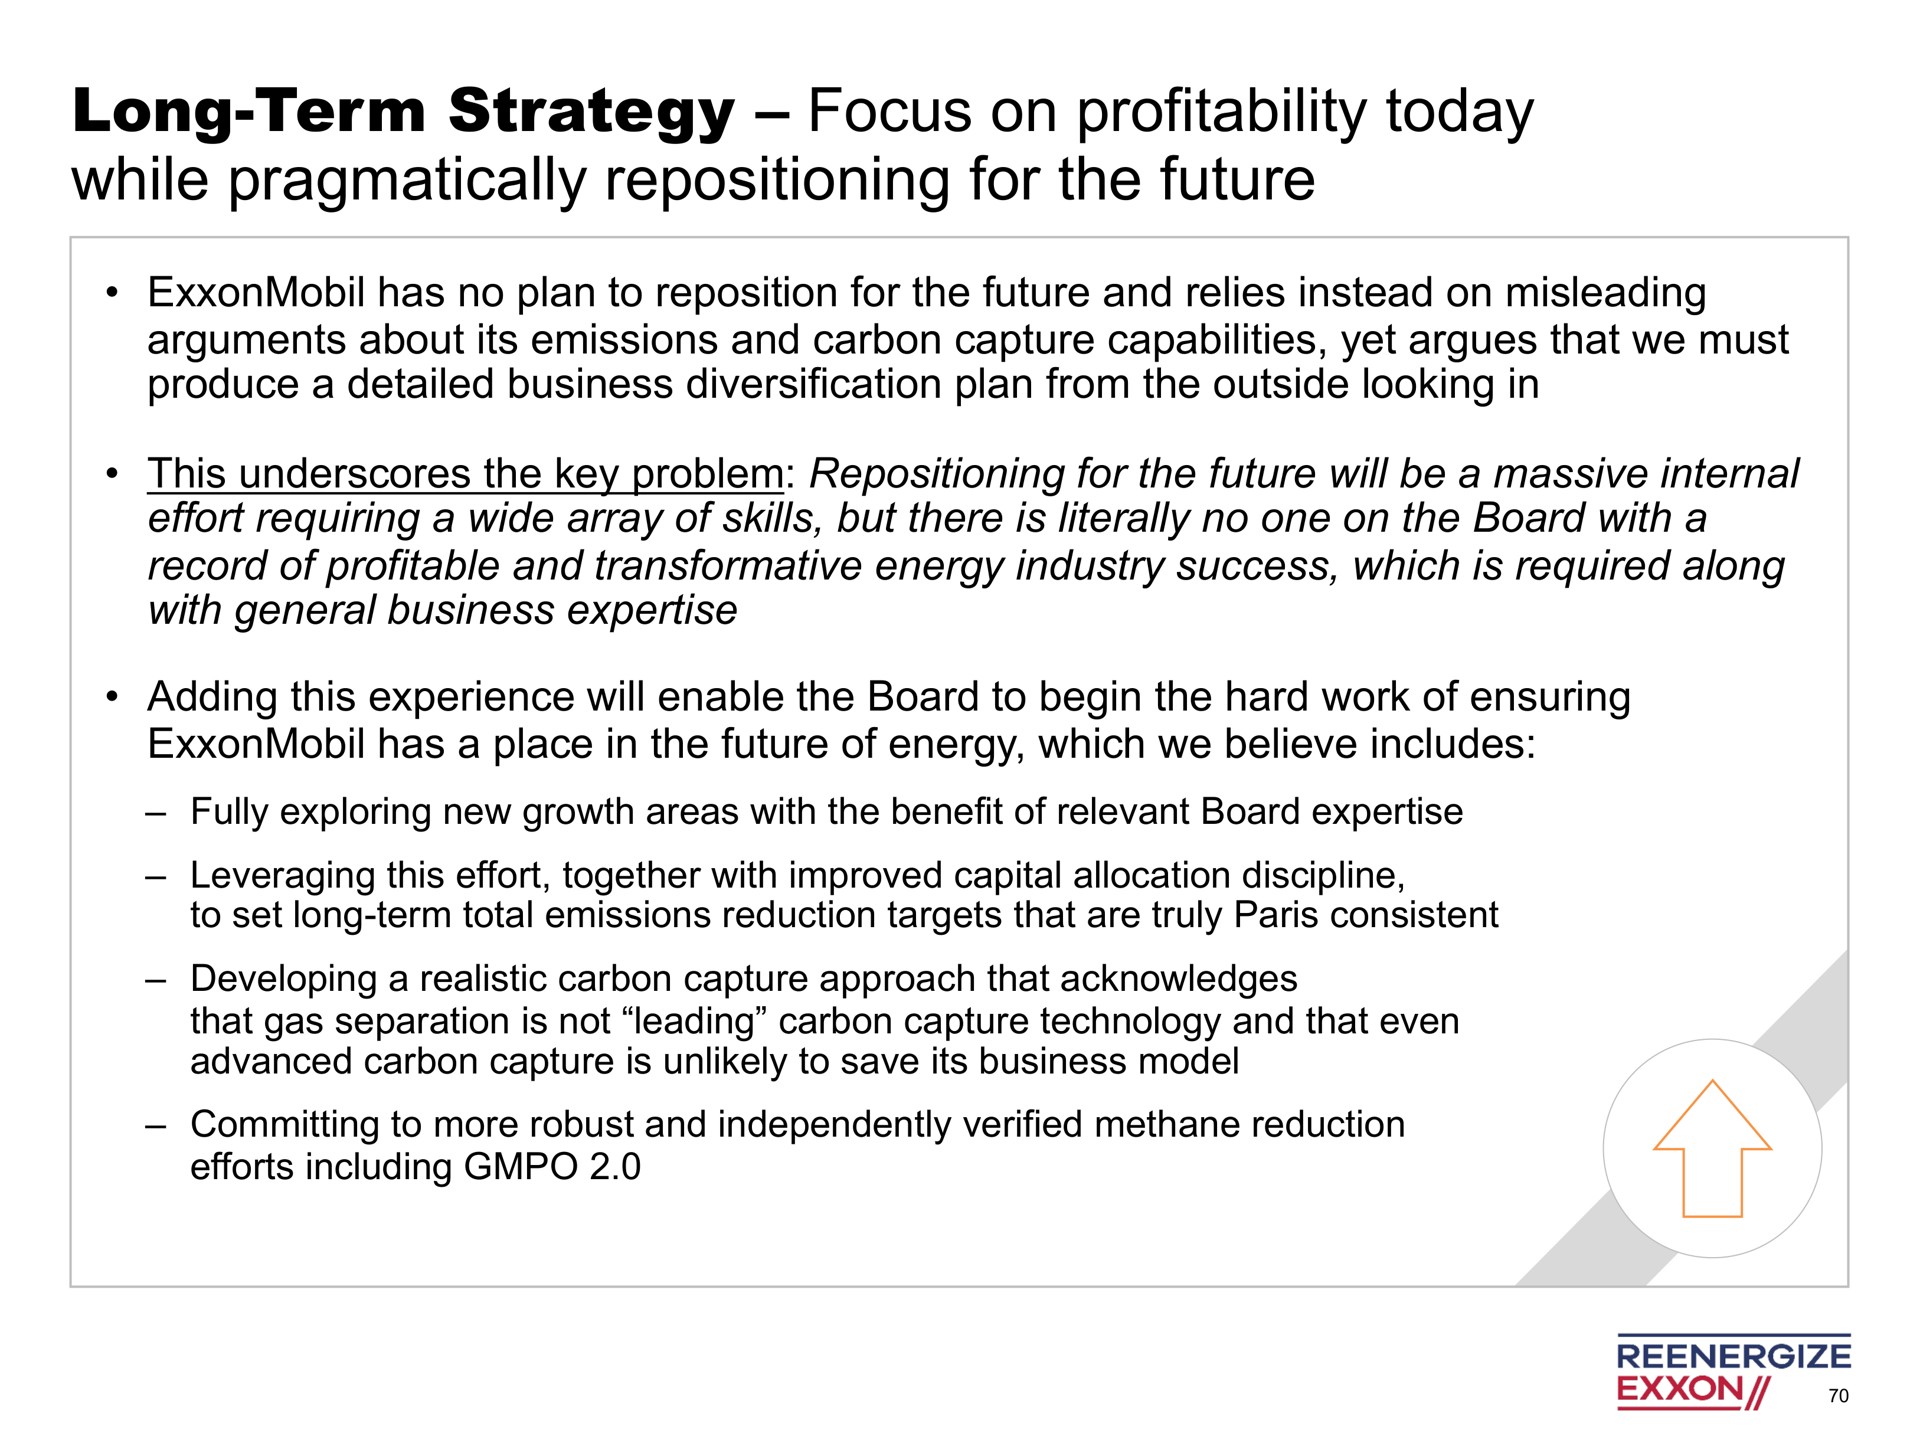 long term strategy focus on profitability today while pragmatically repositioning for the future | Engine No. 1